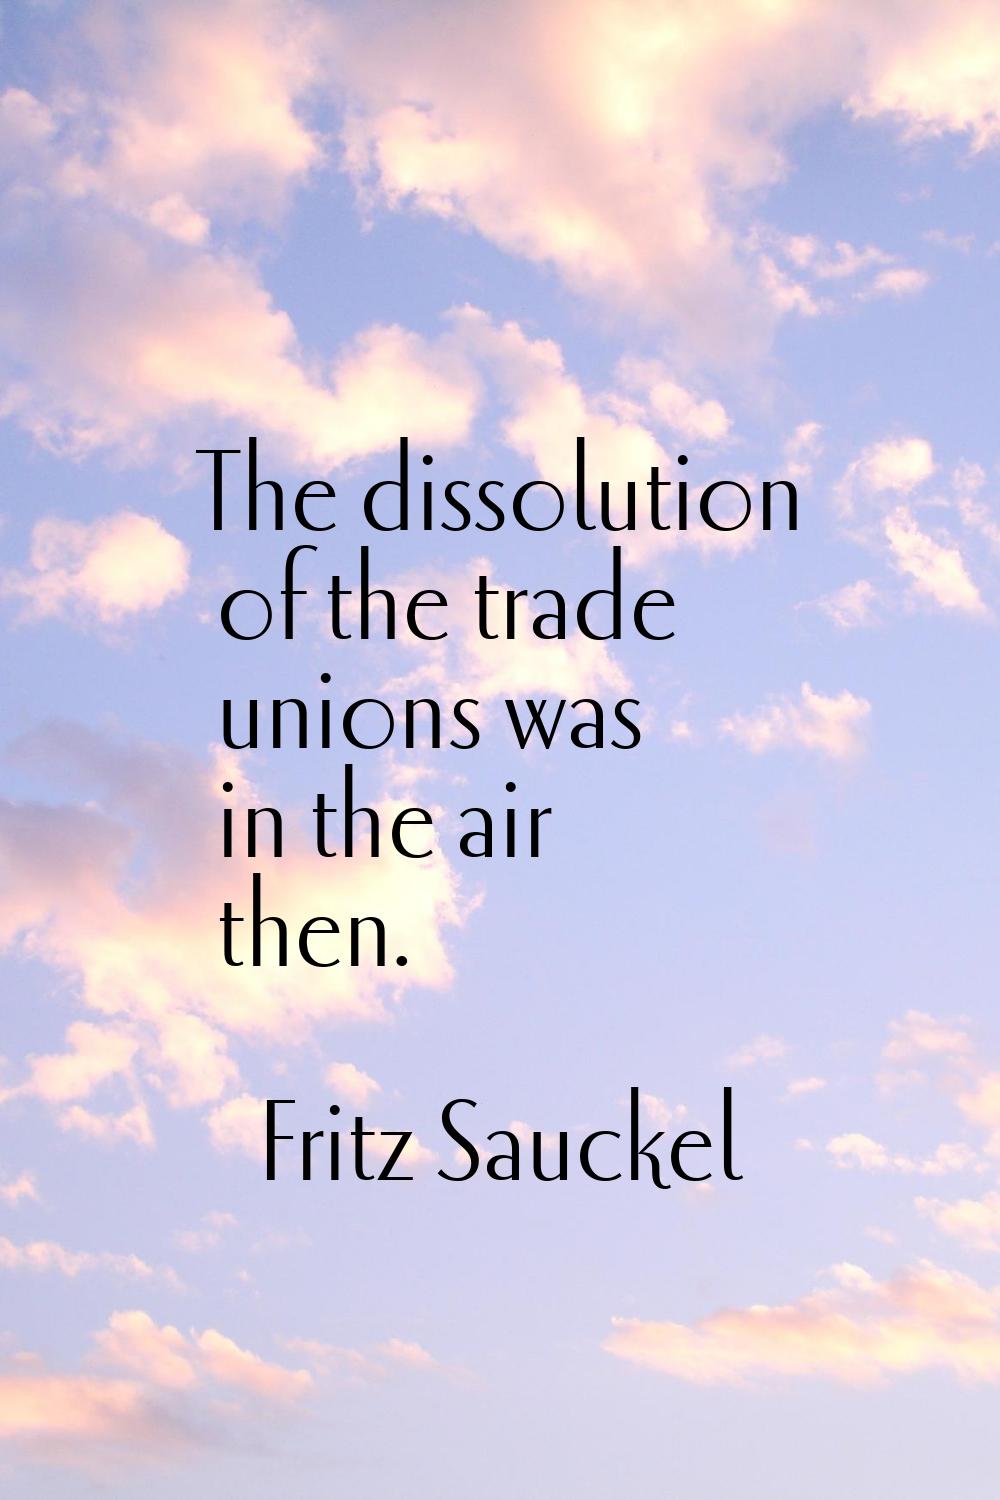 The dissolution of the trade unions was in the air then.